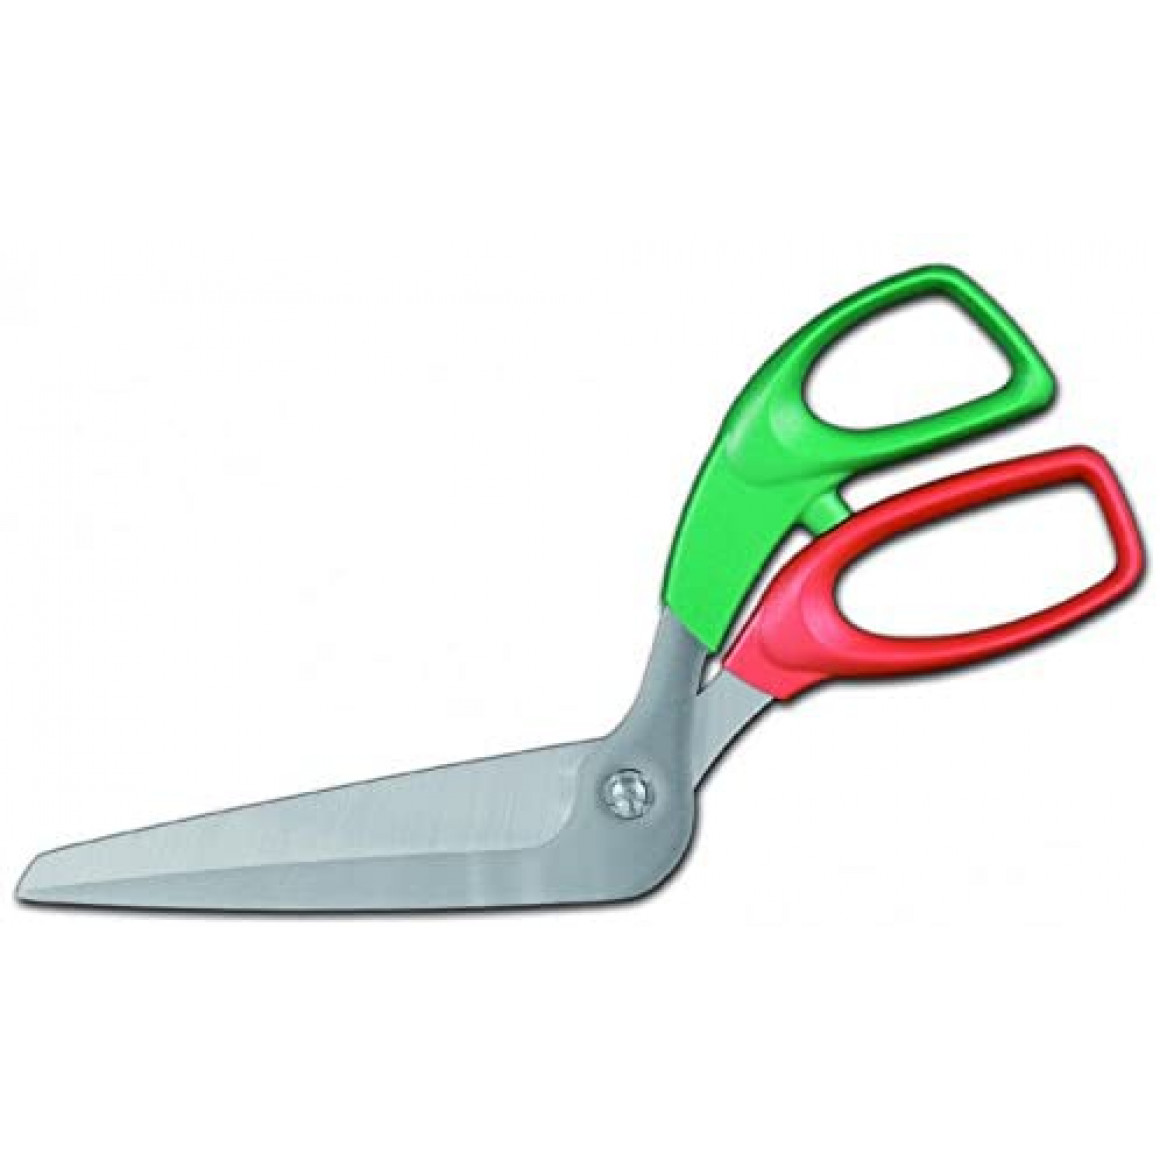 Pizza scissors, stainless steel and divisible/L25